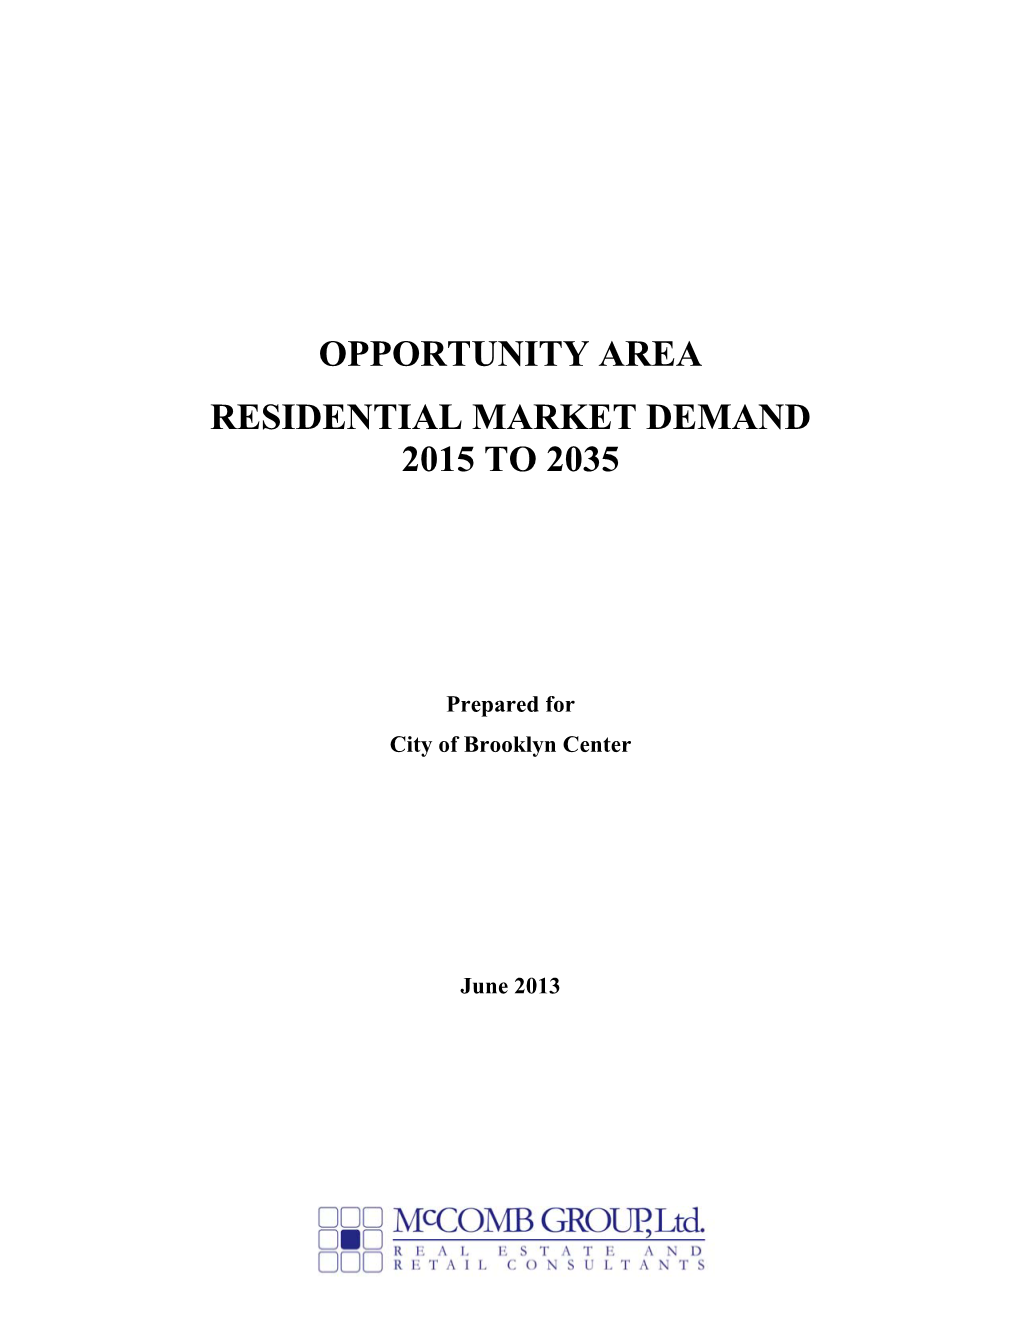 Opportunity Area Residential Market Demand 2015 to 2035